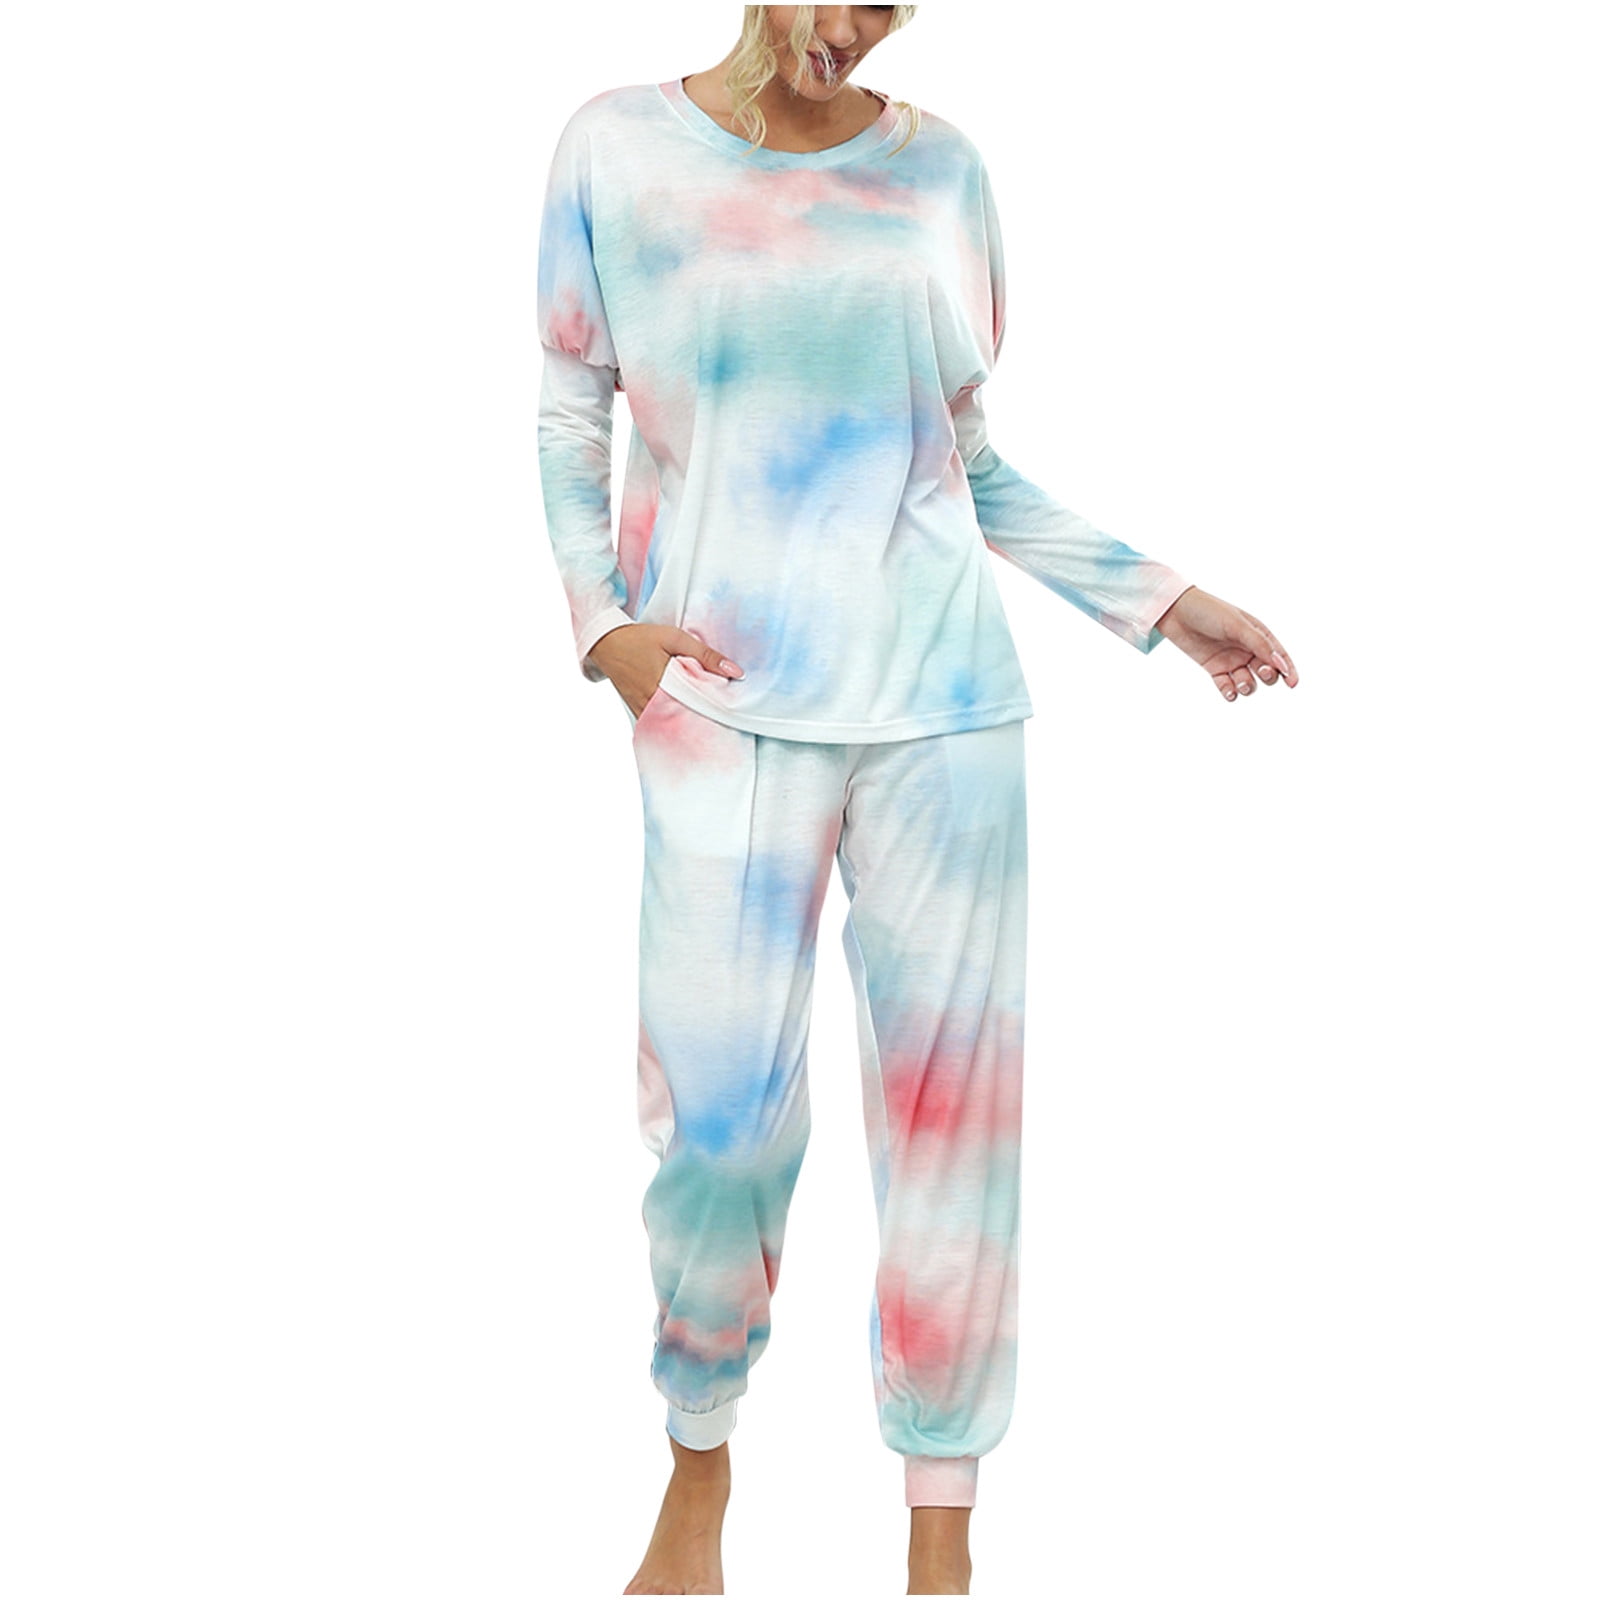 Women's Pajamas Lounge Set Casual Soft Tie Dye Crewneck Long Sleeve Top and  Pants 2 Piece Outfits Pjs Sleepwear Ladies Clothes 